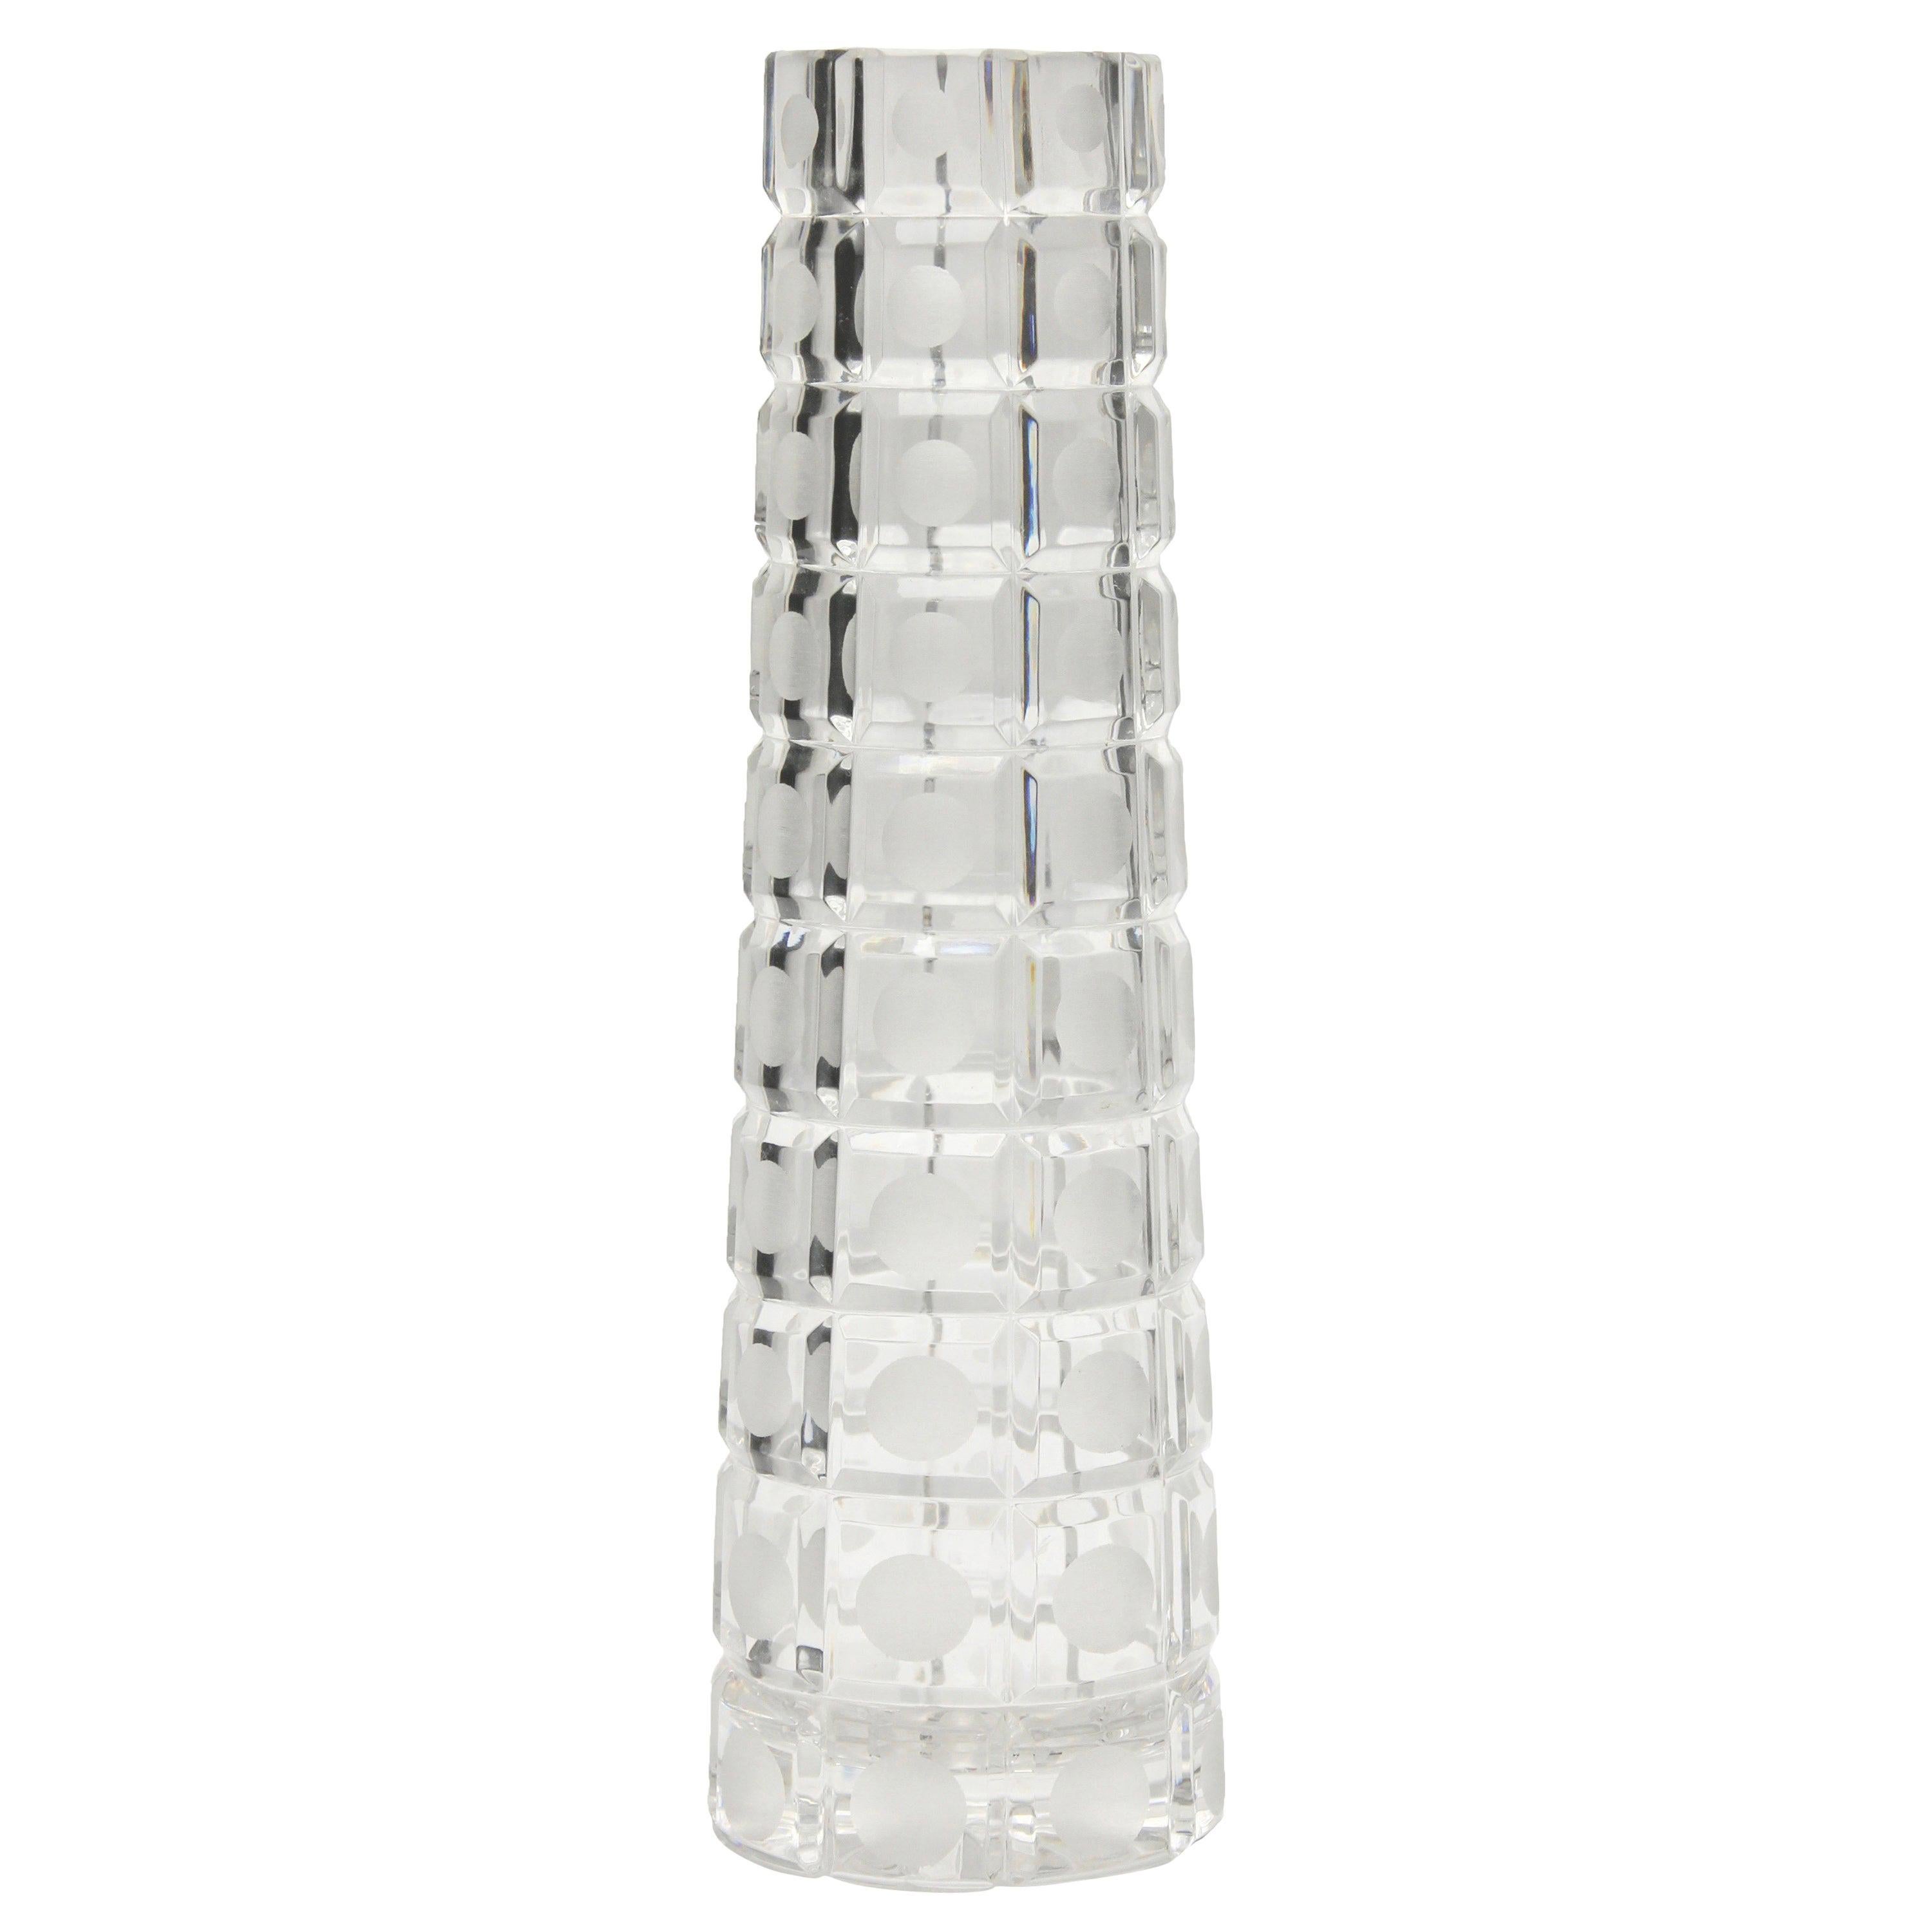 Beautiful reflection when light falls on the vase.
There was a lot of skilled craftsmanship needed to make these strict geometric cut crystal vases.
Measures:
Diameter 2.36 inch, height 6.69 inch.
Diameter 2.75 inch, height 9.44 inch.

handcut